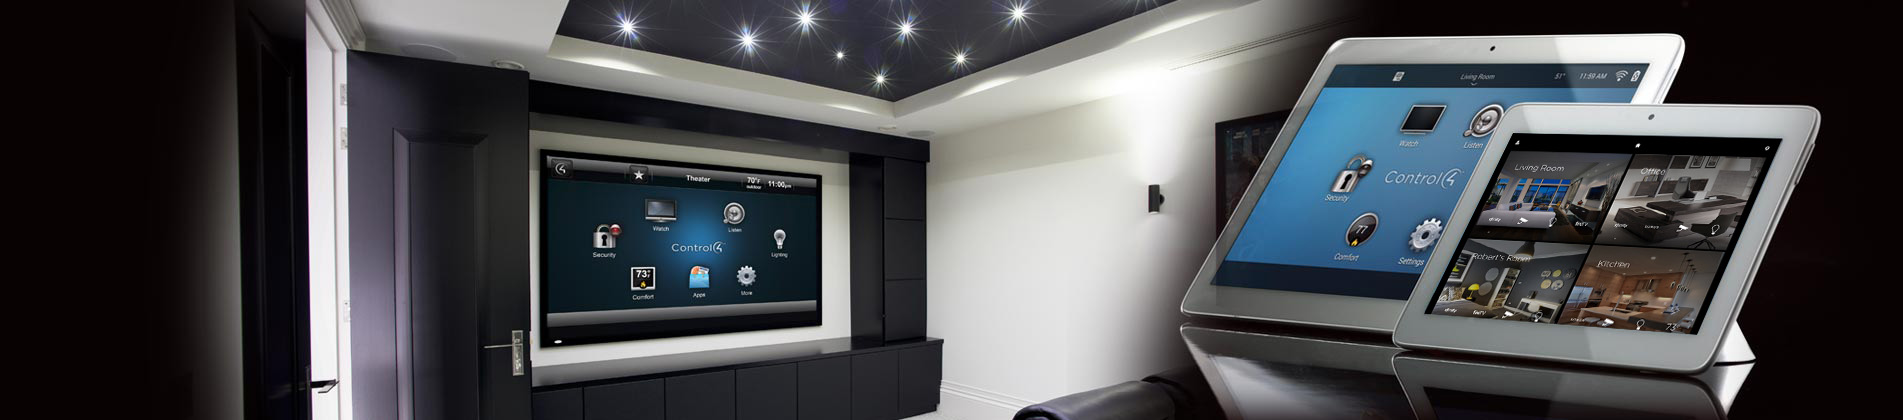 Home Automation Home Theater And Surveillance Camera System